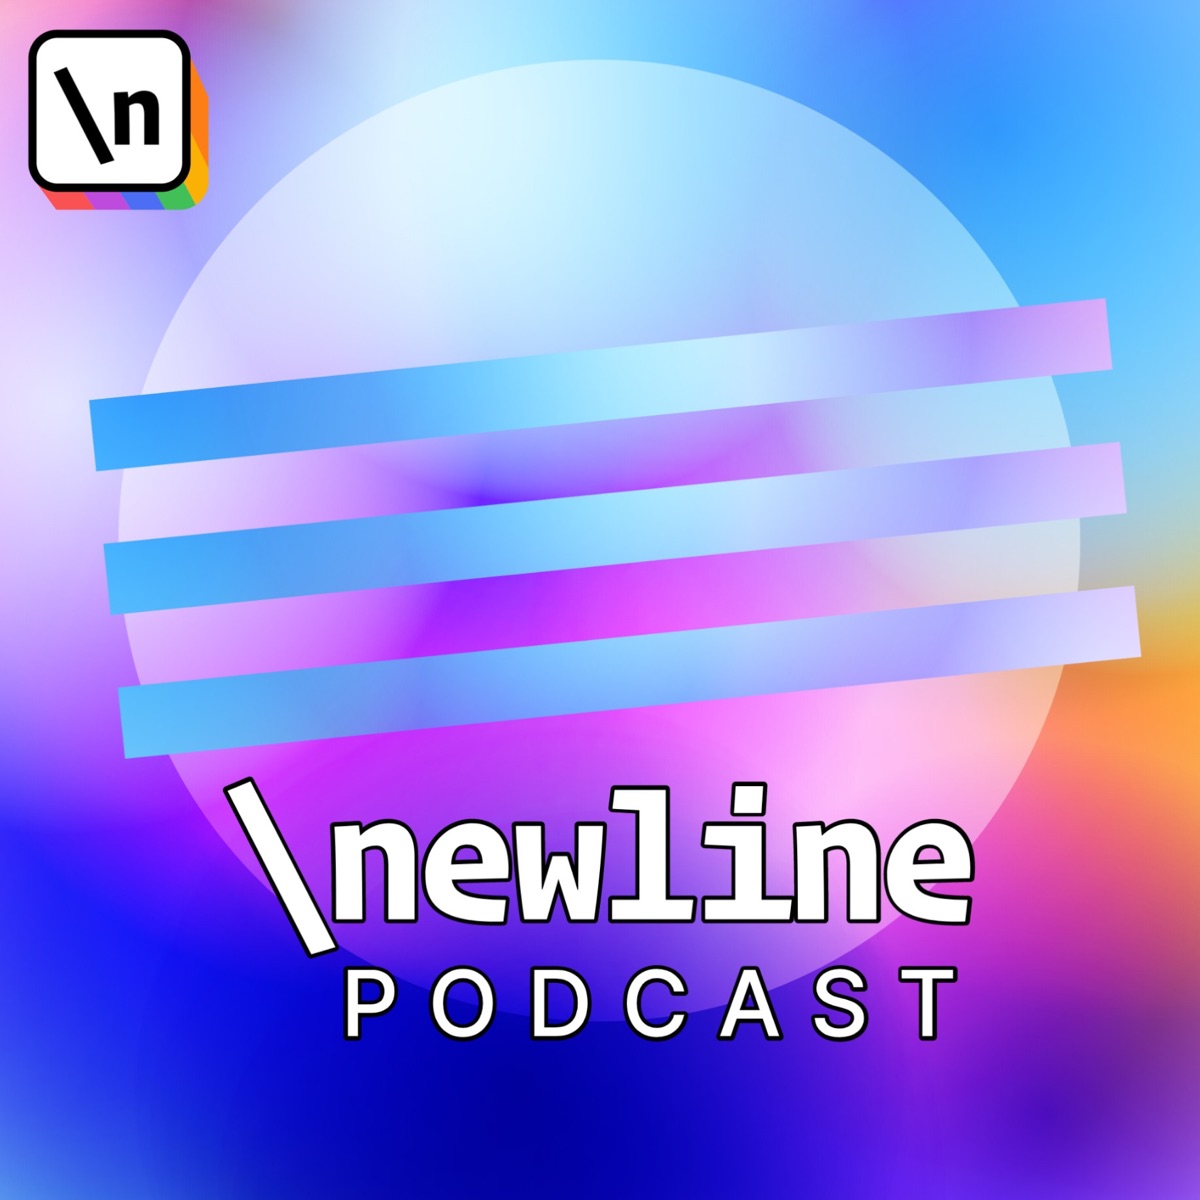 Newline Podcast Podtail - face bolt id roblox roblox free script injector